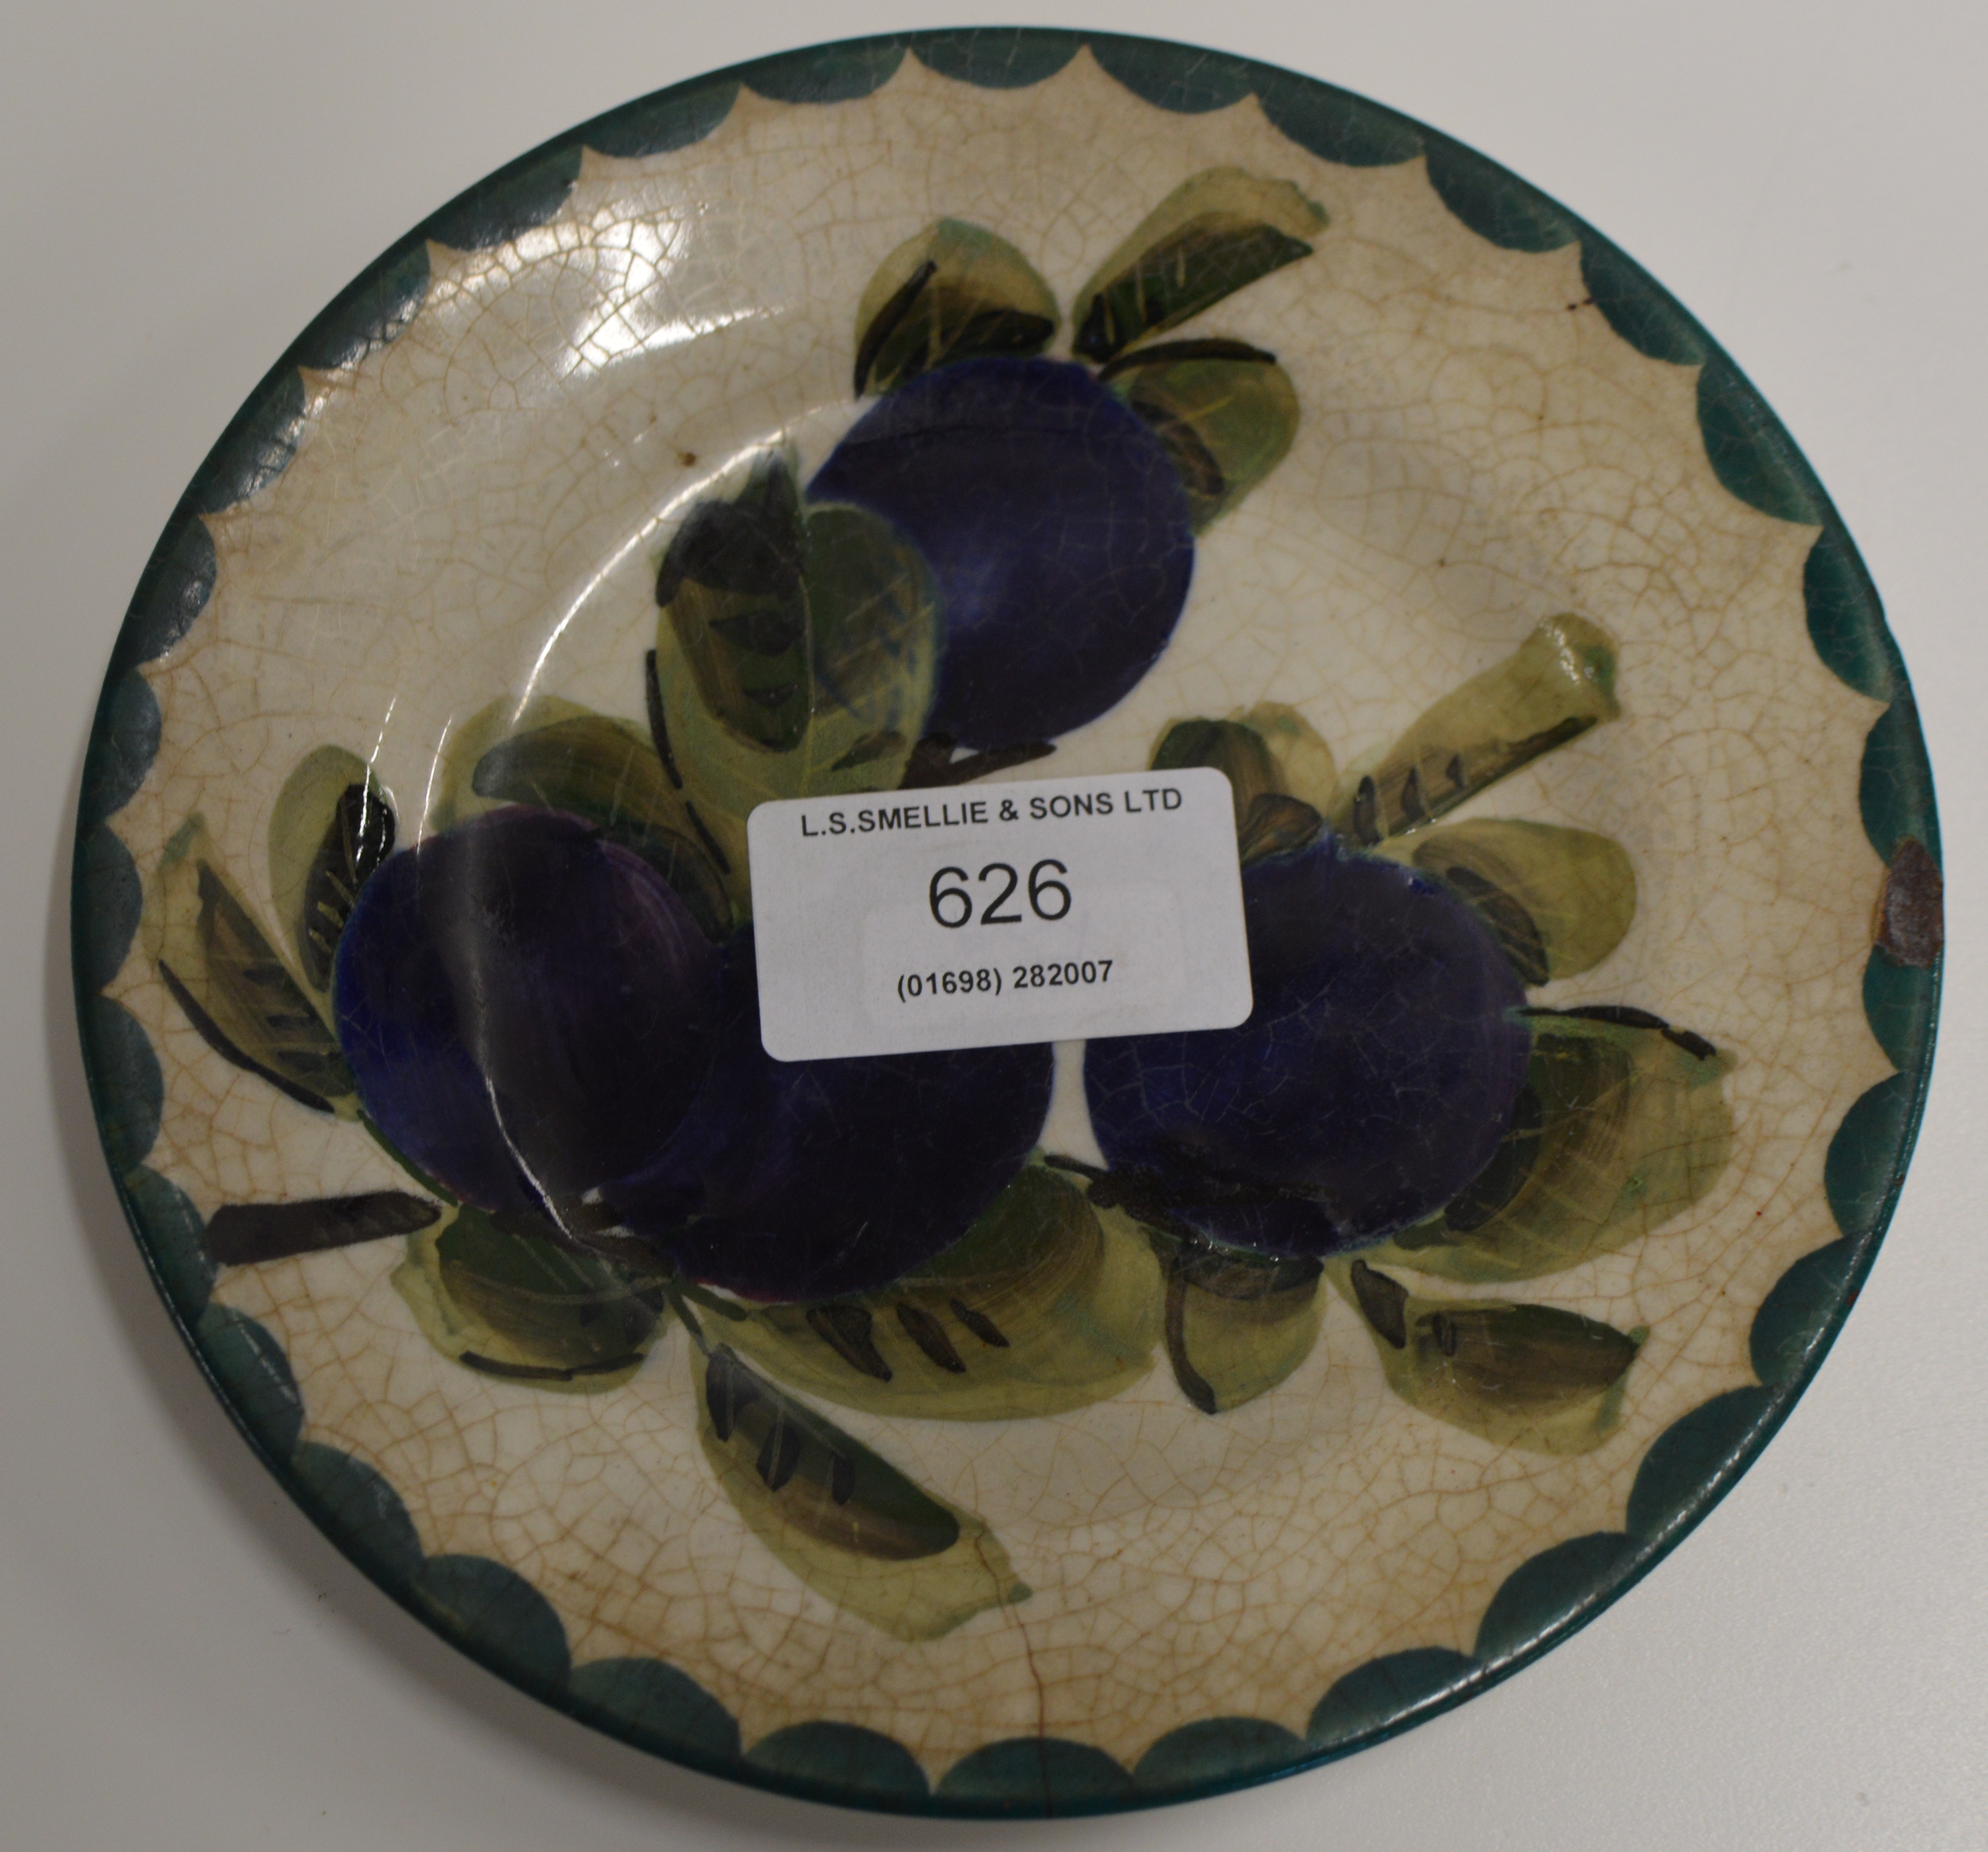 5½" DIAMETER OLD WEMYSS POTTERY DISH DECORATED WITH PLUMS & SIGNED ON REVERSE